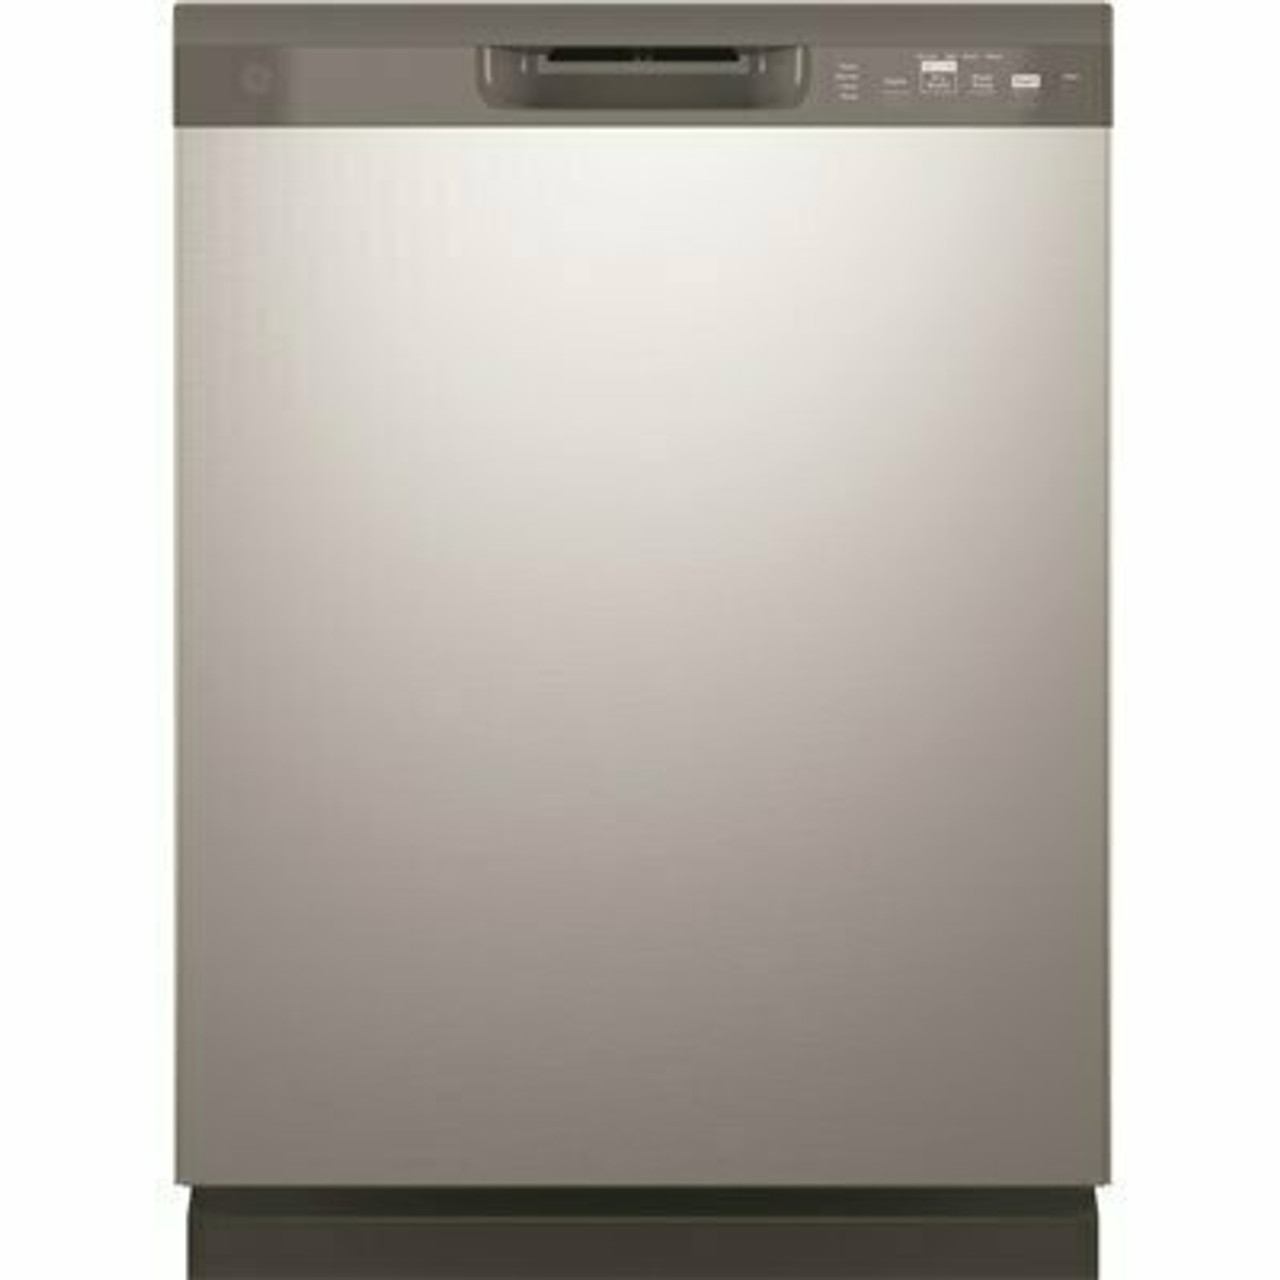 Ge 24 In. In Stainless Steel Front Control Tall Tub Dishwasher With Steam Cleaning, Dry Boost, And 59 Dba